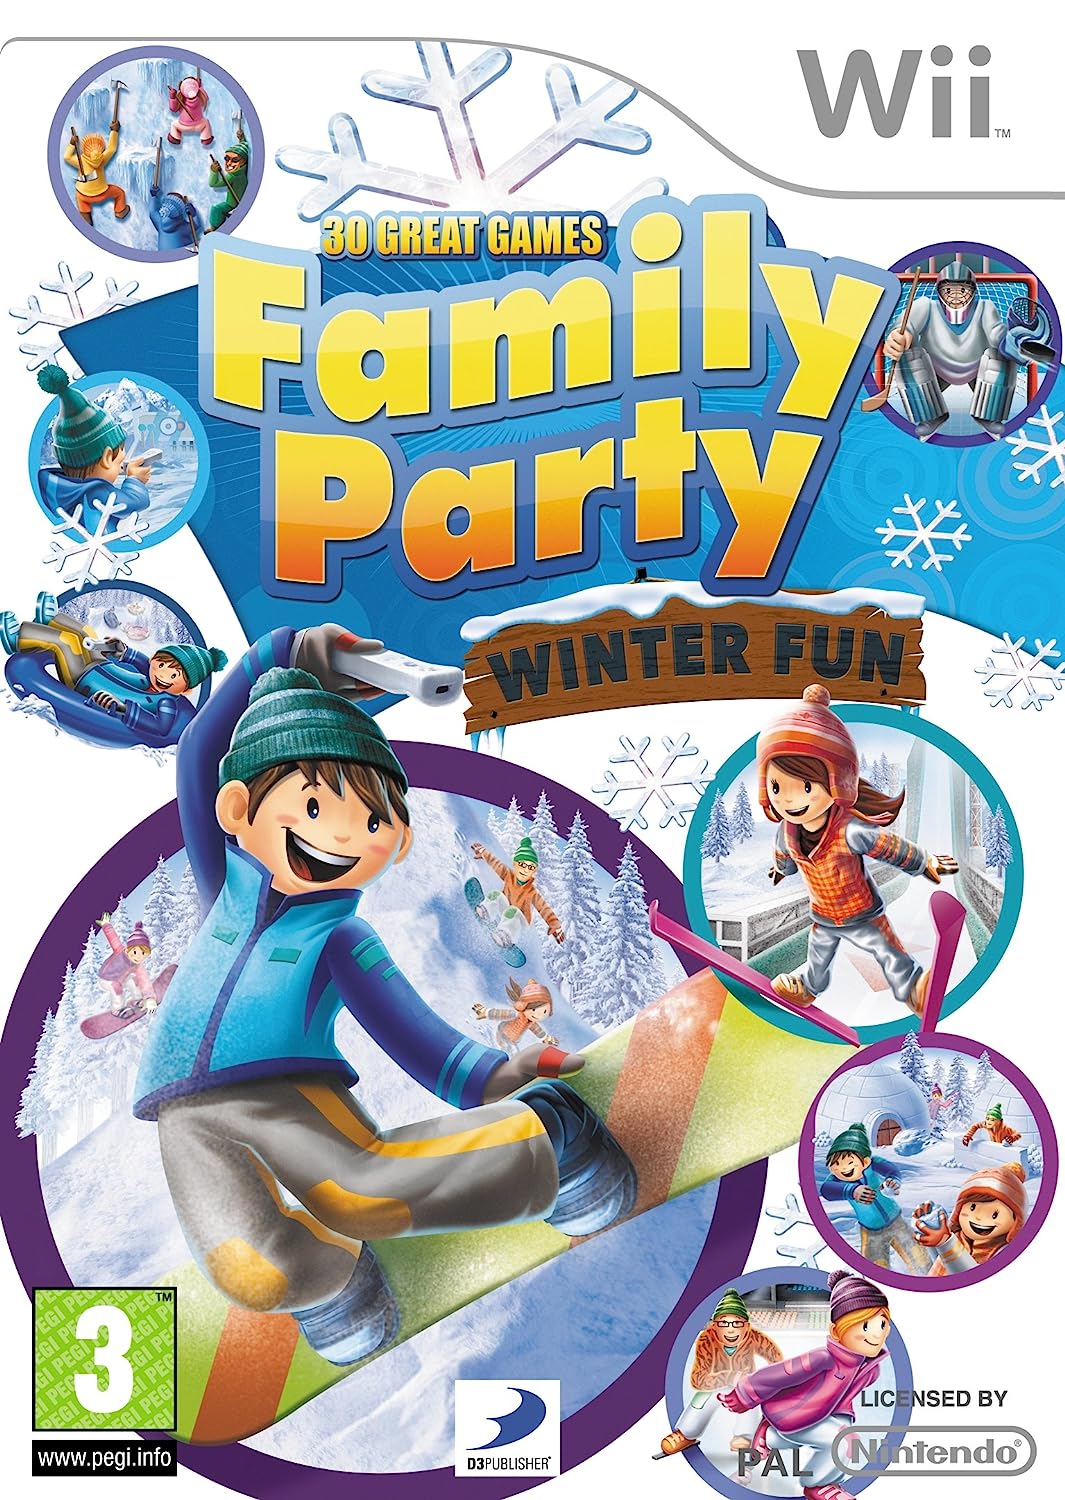 Family Party: 30 Great Games Winter Fun - Nintendo Wii